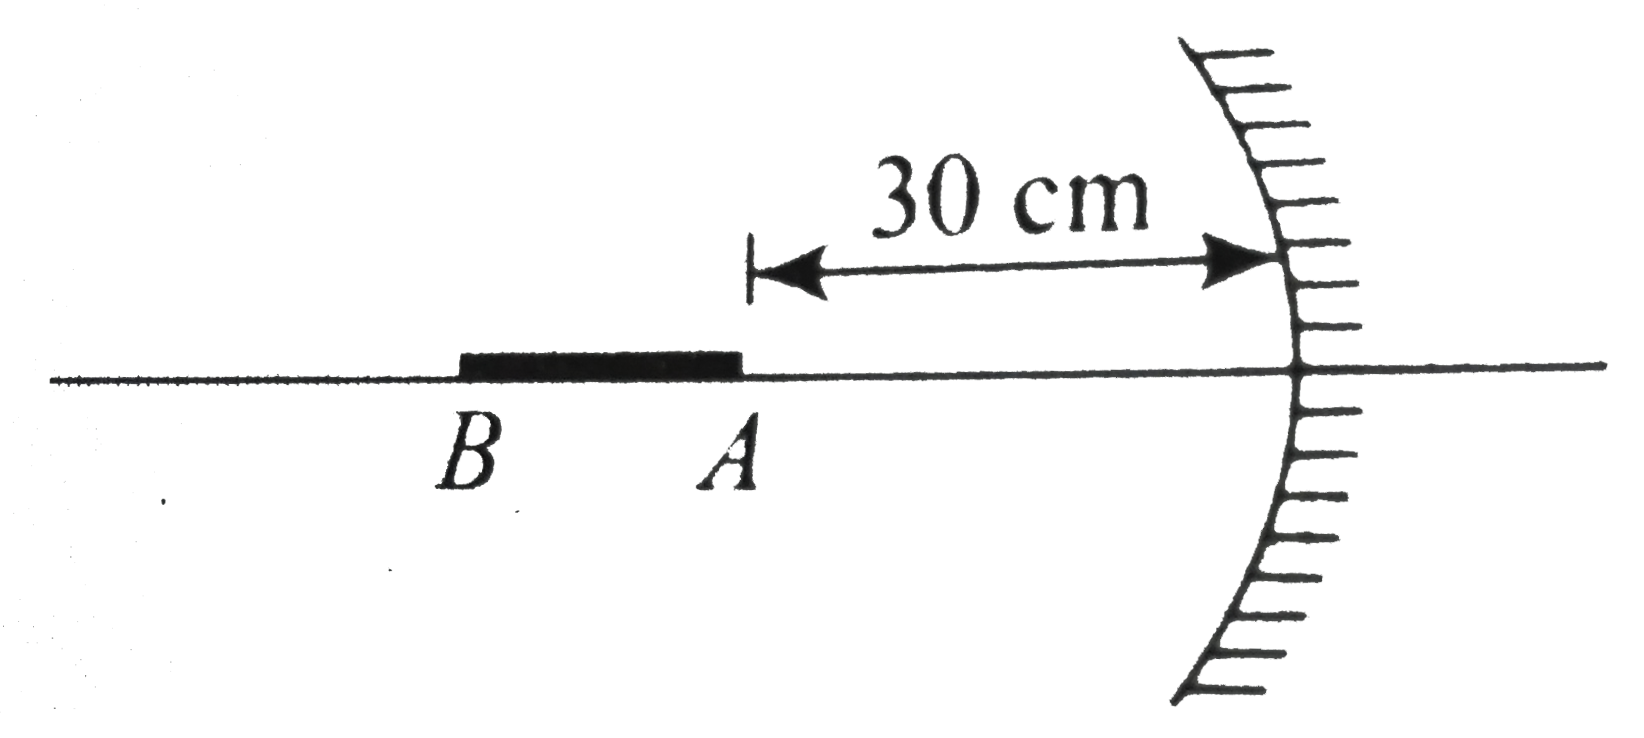 Object AB is placed on the axis of a concave mirror of focal length 10cm. End A of the object is at 30cm from the mirror. Find the length of the image   a. if length of object is 5cm.   b. if length of object is 1 mm.